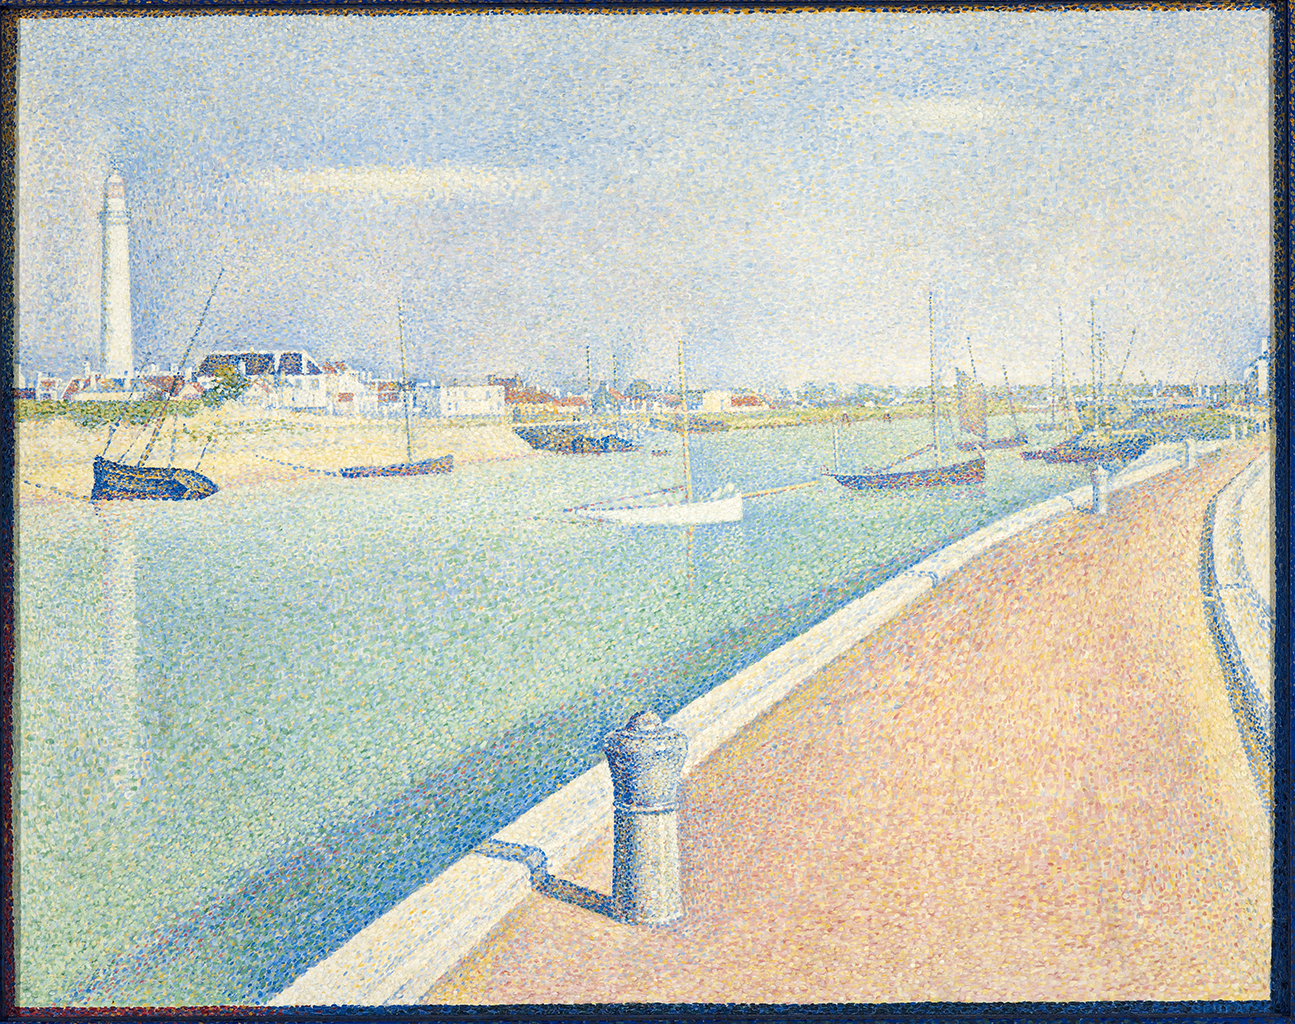 A painting created with small colorful dots depicting a river with docked boats along it. To the right, there is a road or a rail with white barriers along both its side. In the background there is a large lighthouse overlooking a small town which stretches toward the horizon.